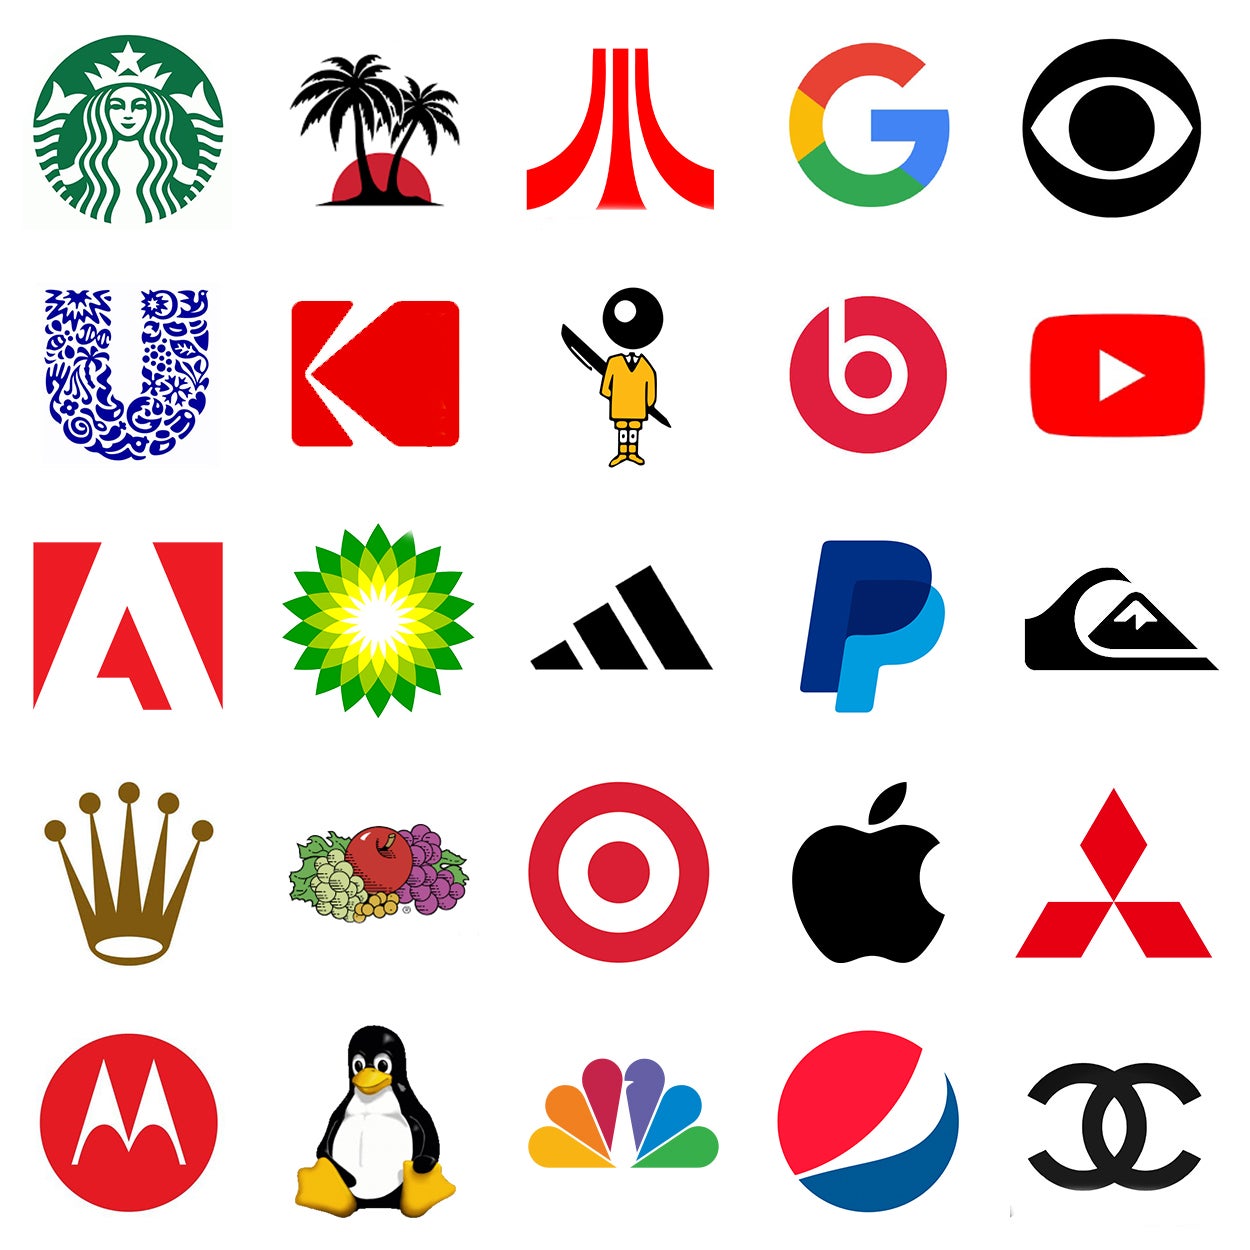 Most People Can't Identify 12 These Logos You?